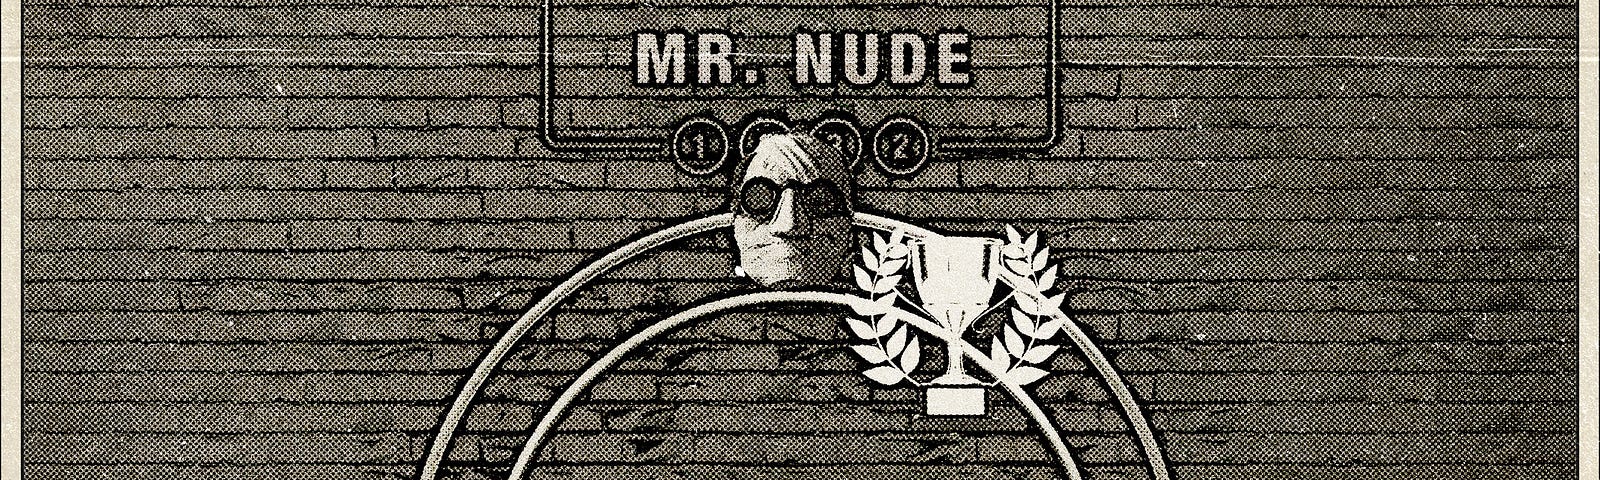 Invisible man wins nudity contest